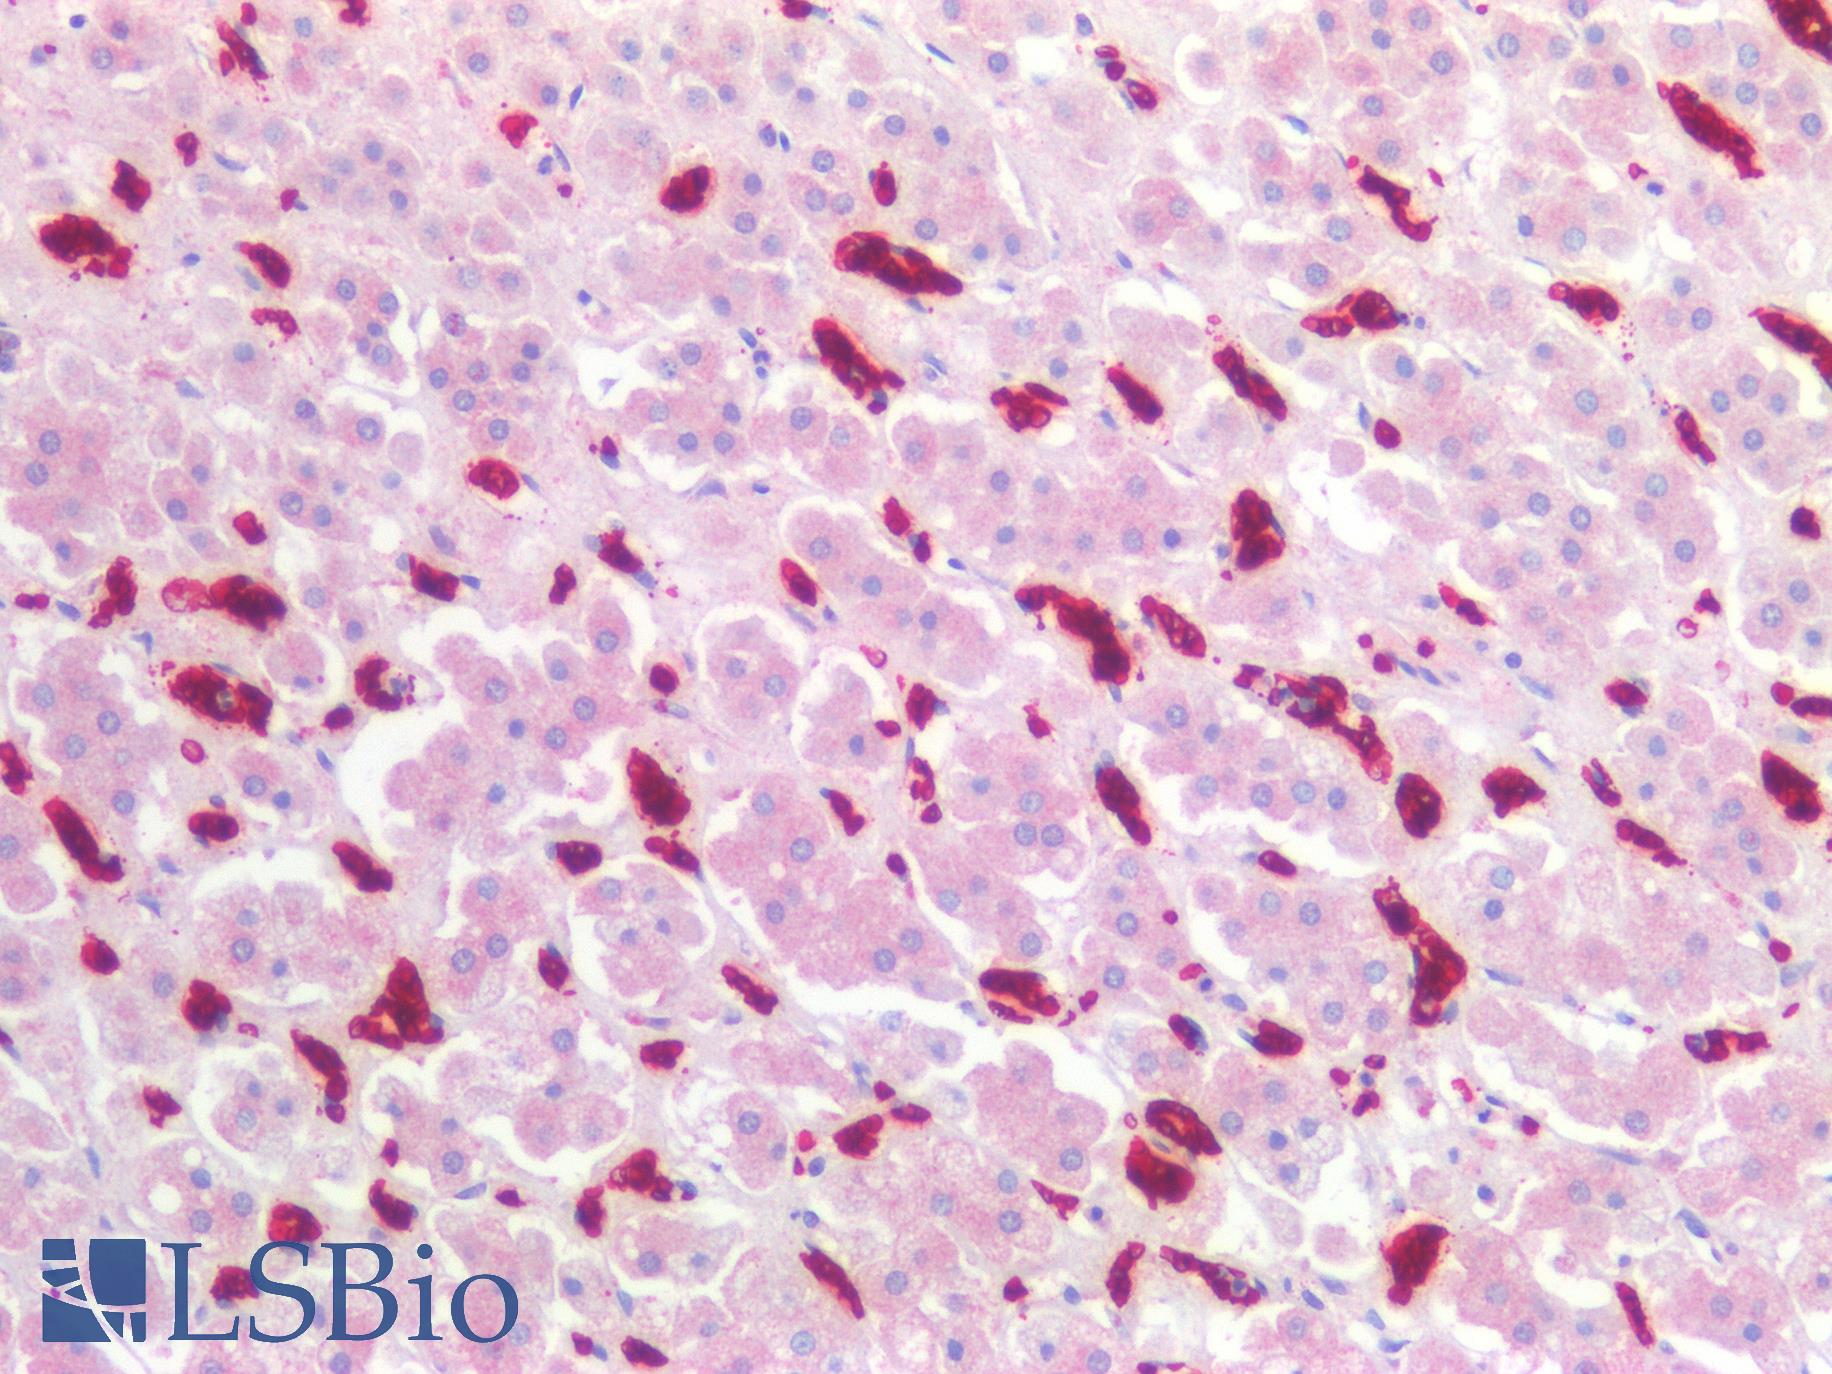 GYPA / CD235a / Glycophorin A Antibody - Human Adrenal: Formalin-Fixed, Paraffin-Embedded (FFPE)